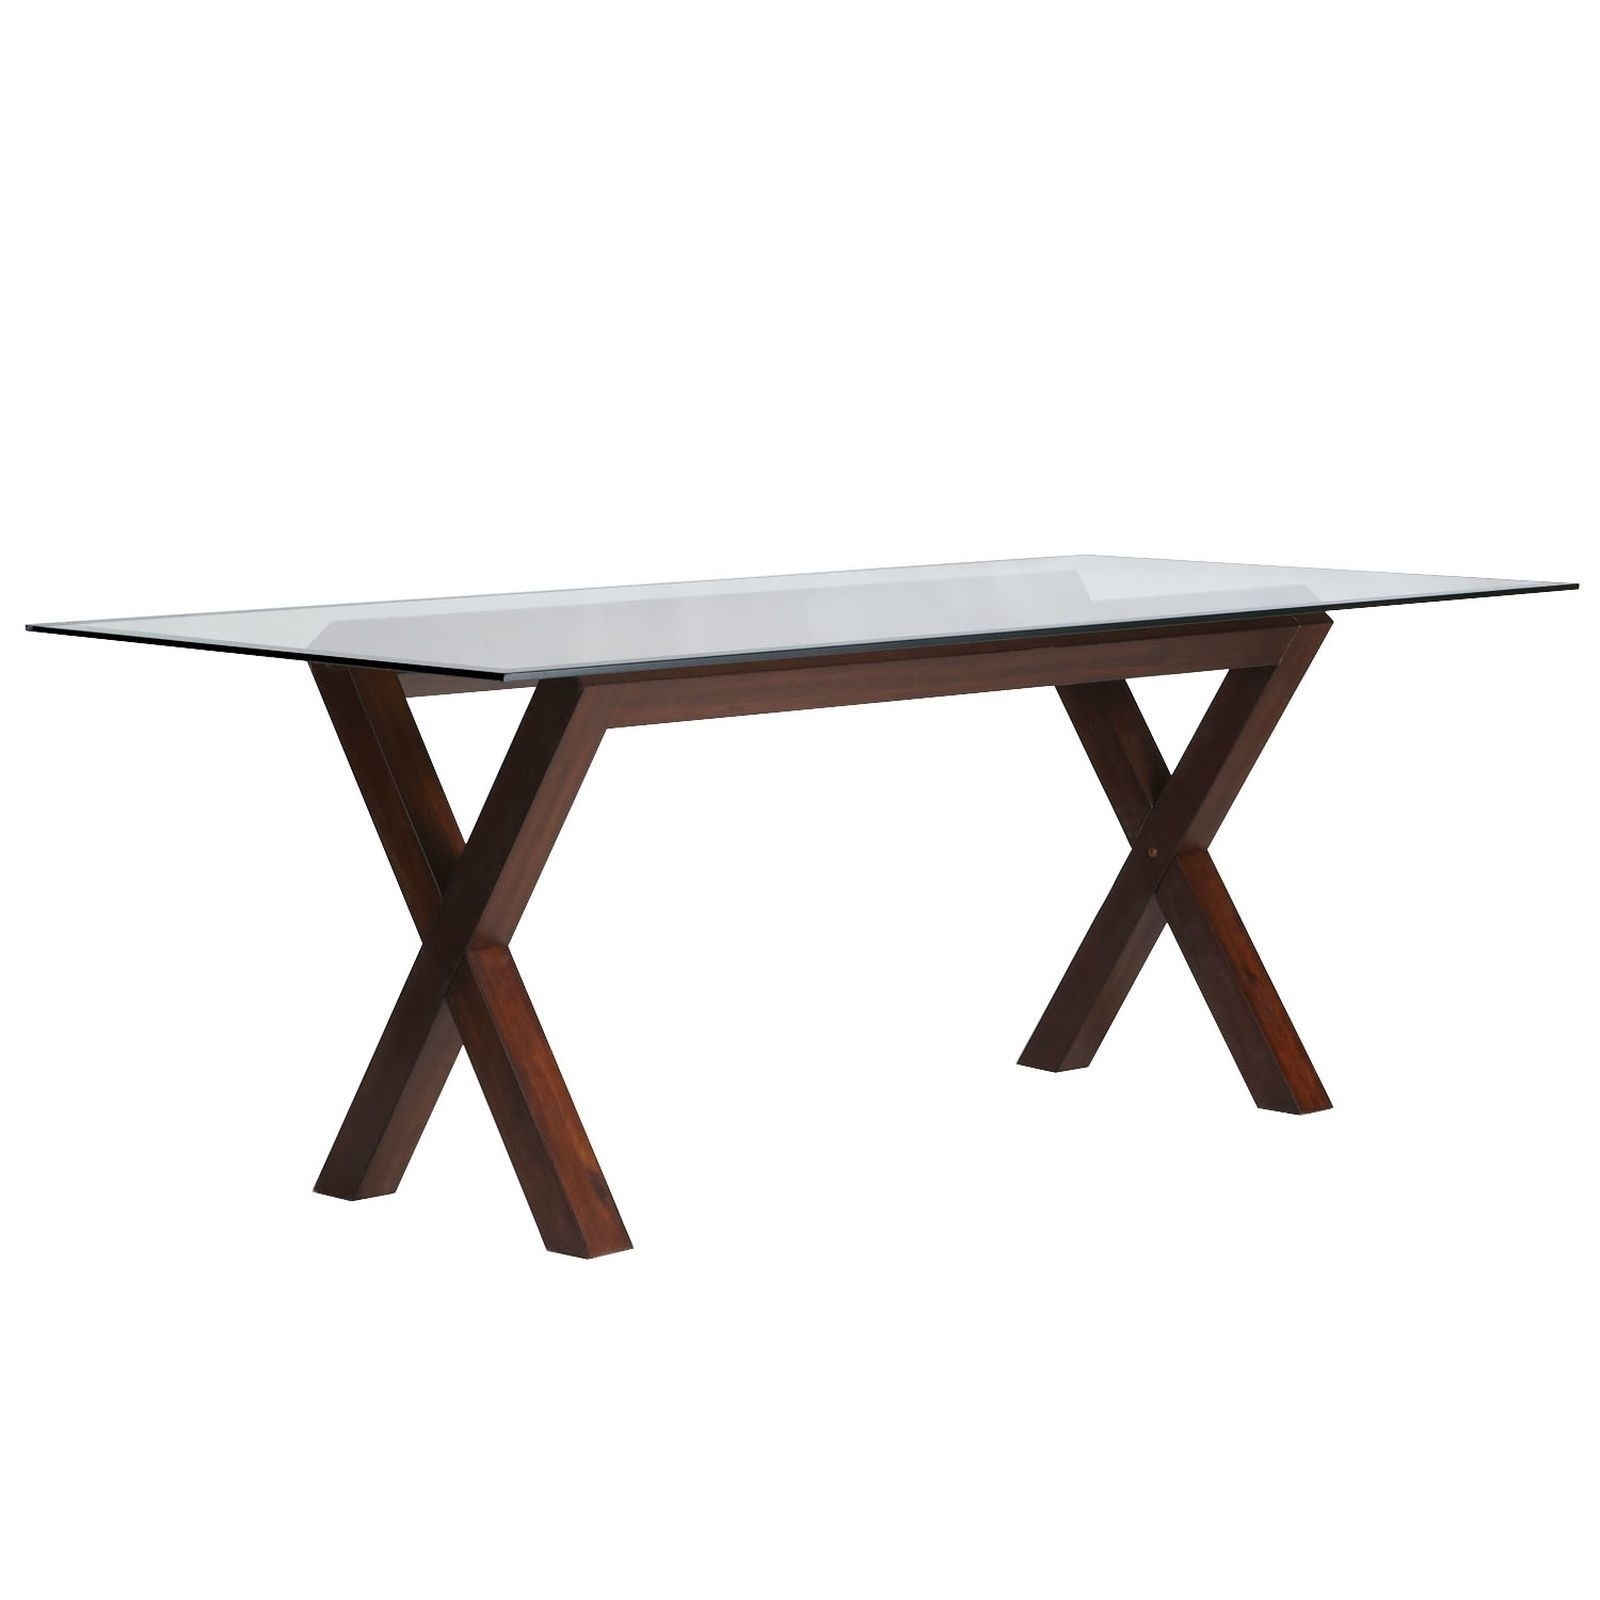 Wood Base Glass Top Dining Table For 2020 Ideas On Foter